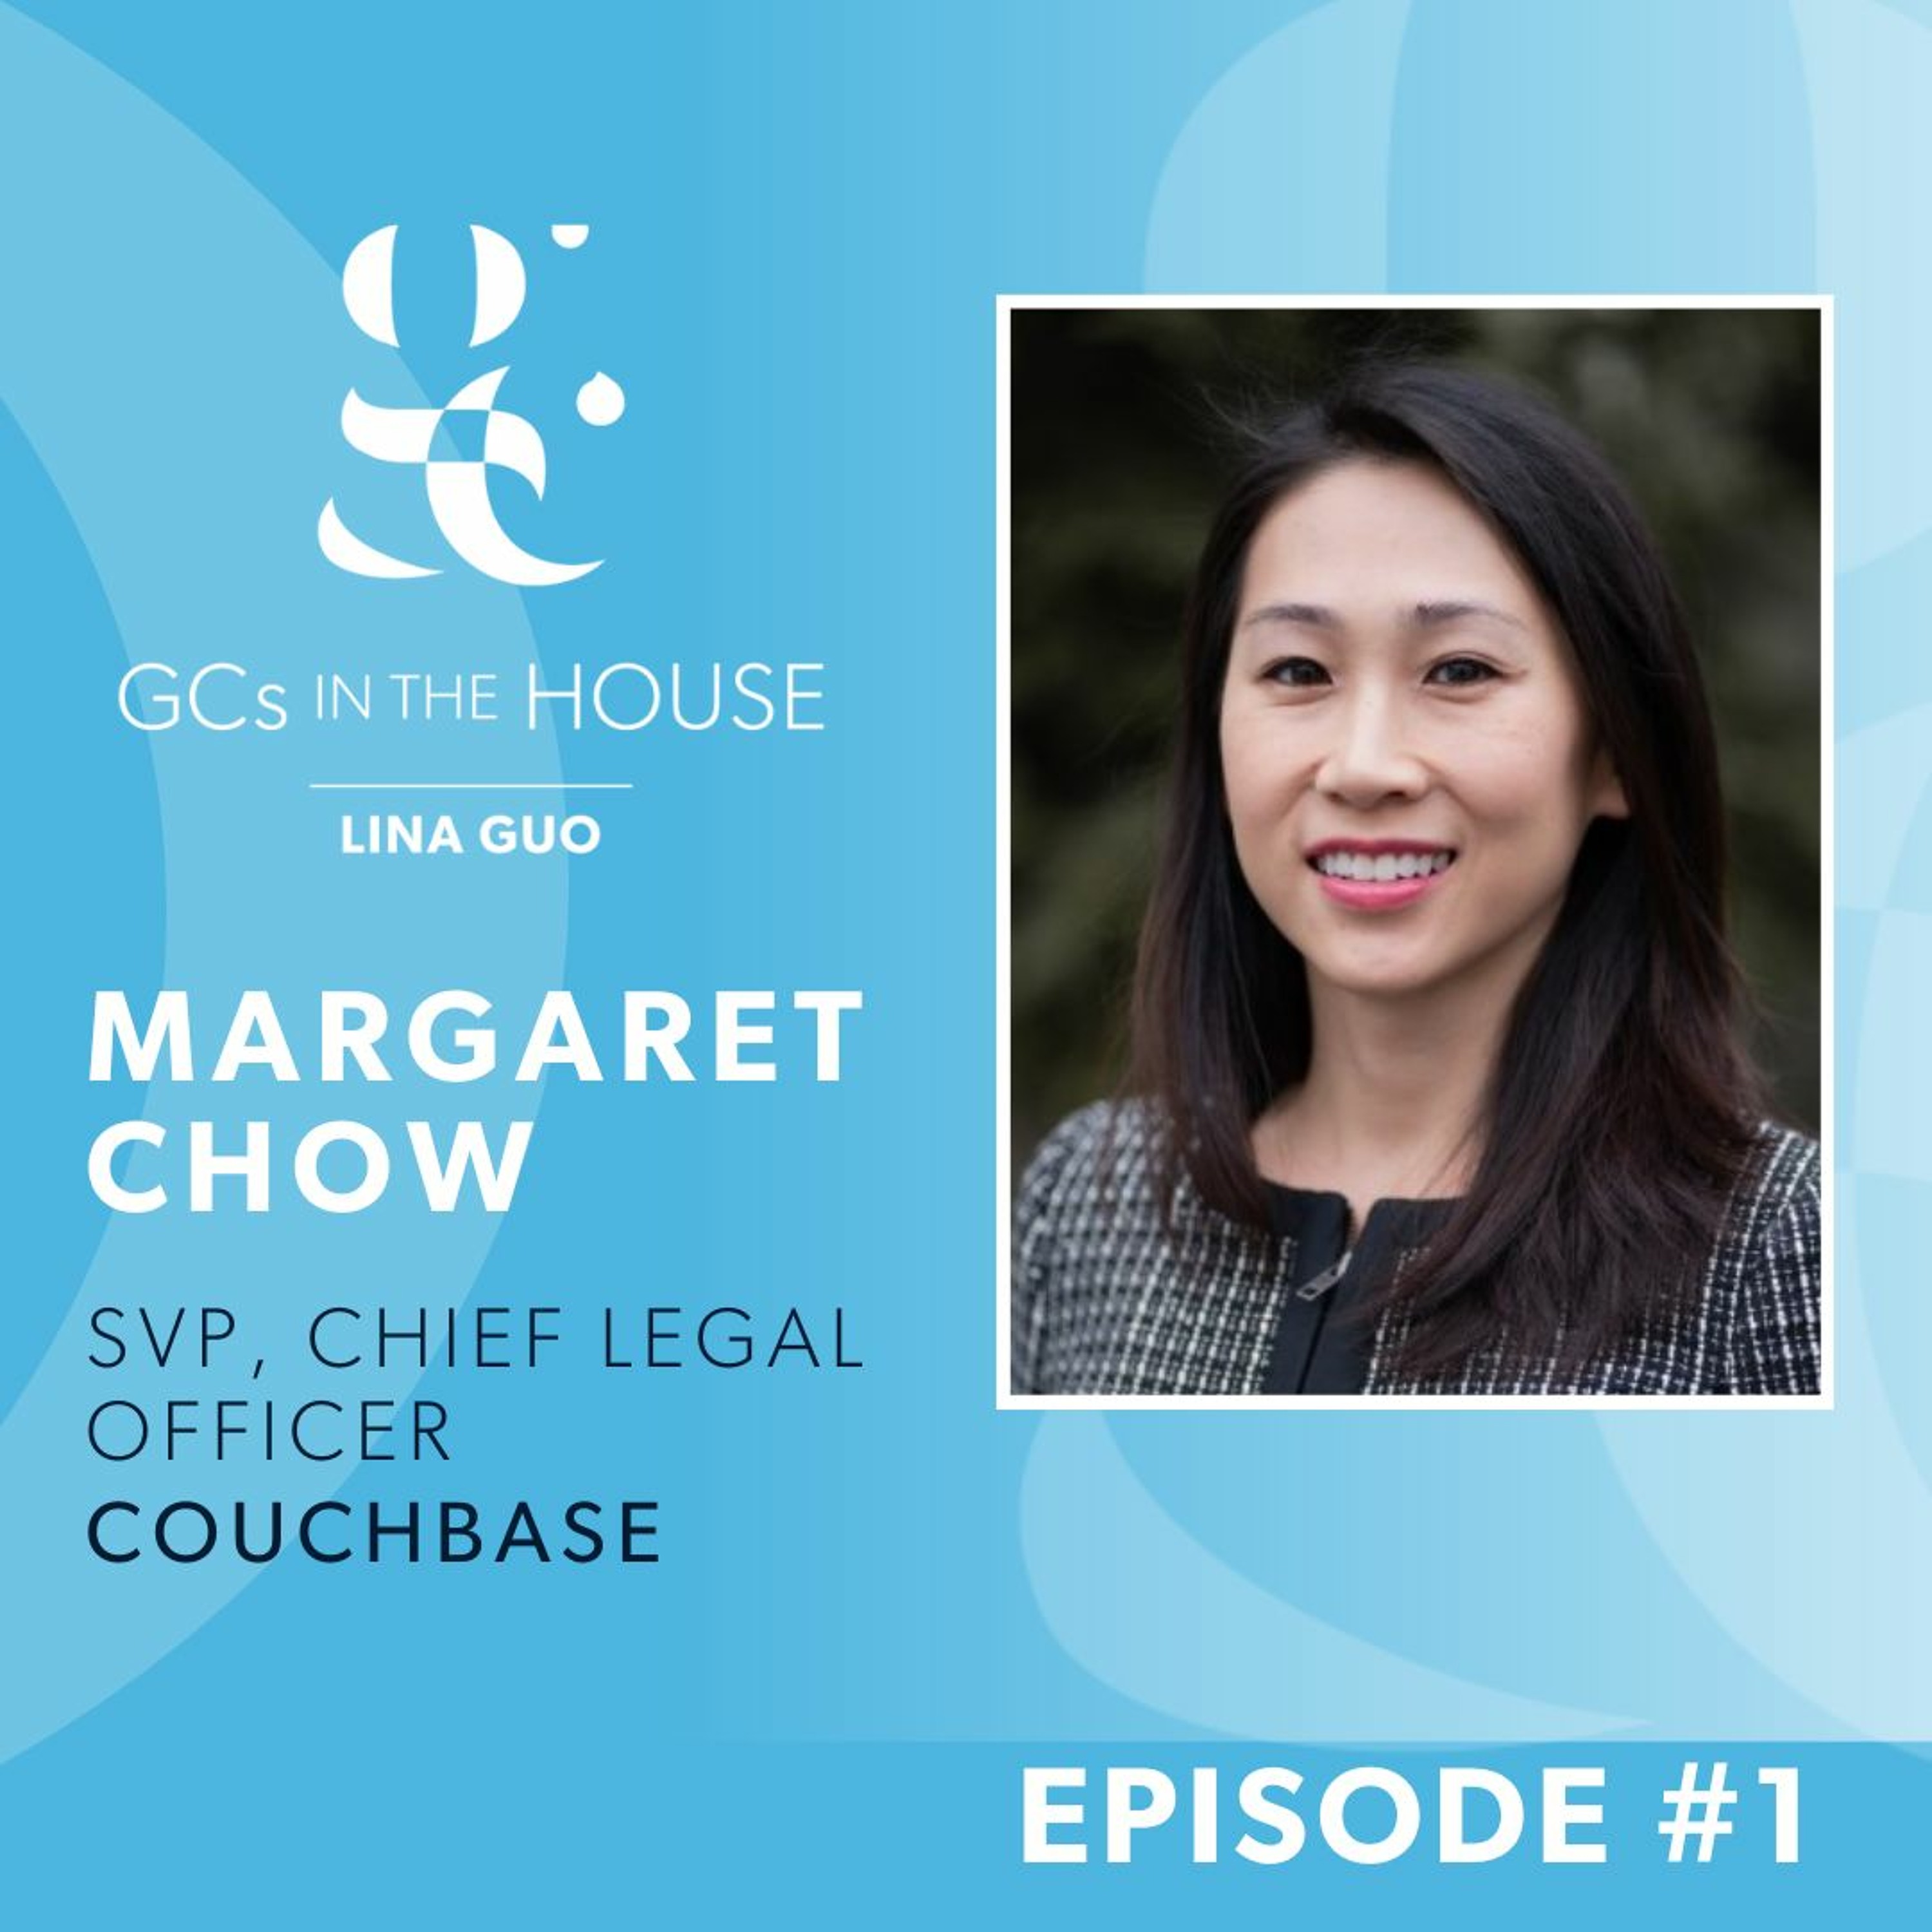 A Conversation with Margaret Chow, SVP and Chief Legal Officer of Couchbase